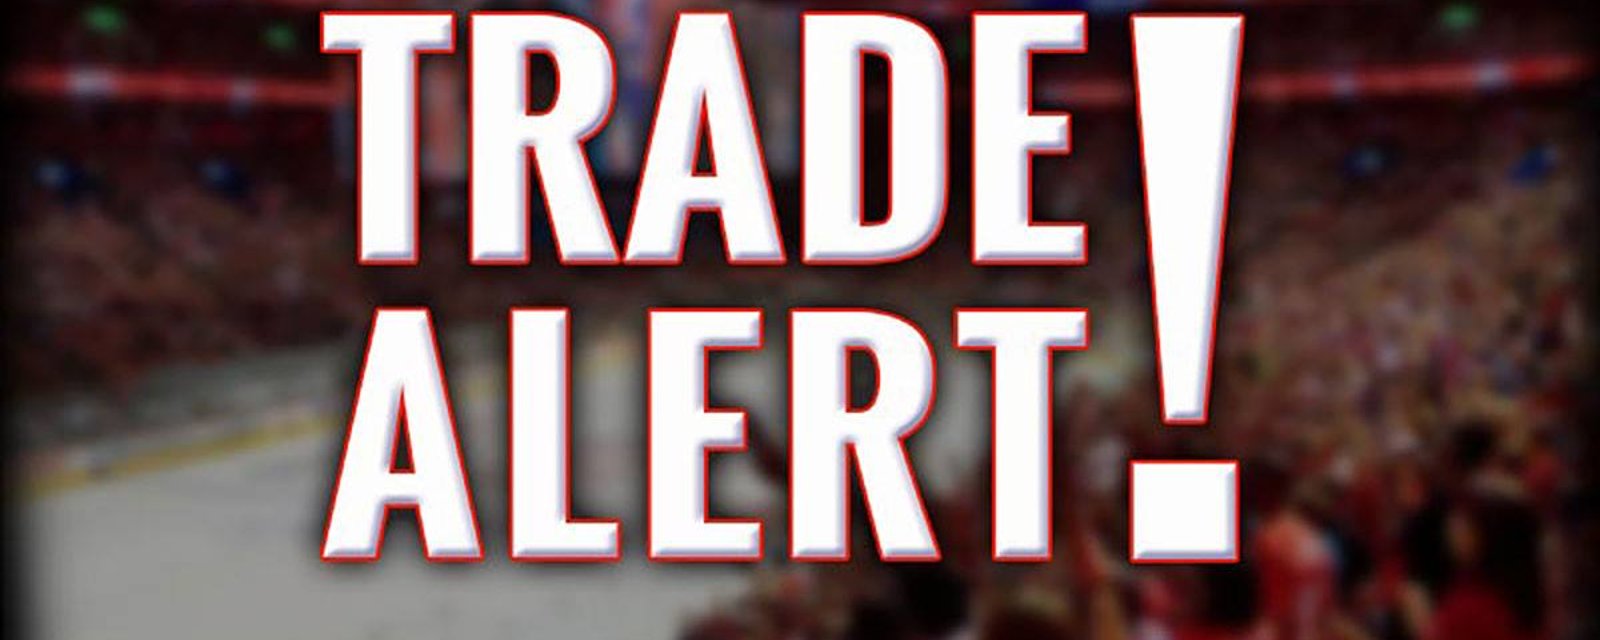 Breaking: NHL team announces they have made a trade after the deadline!